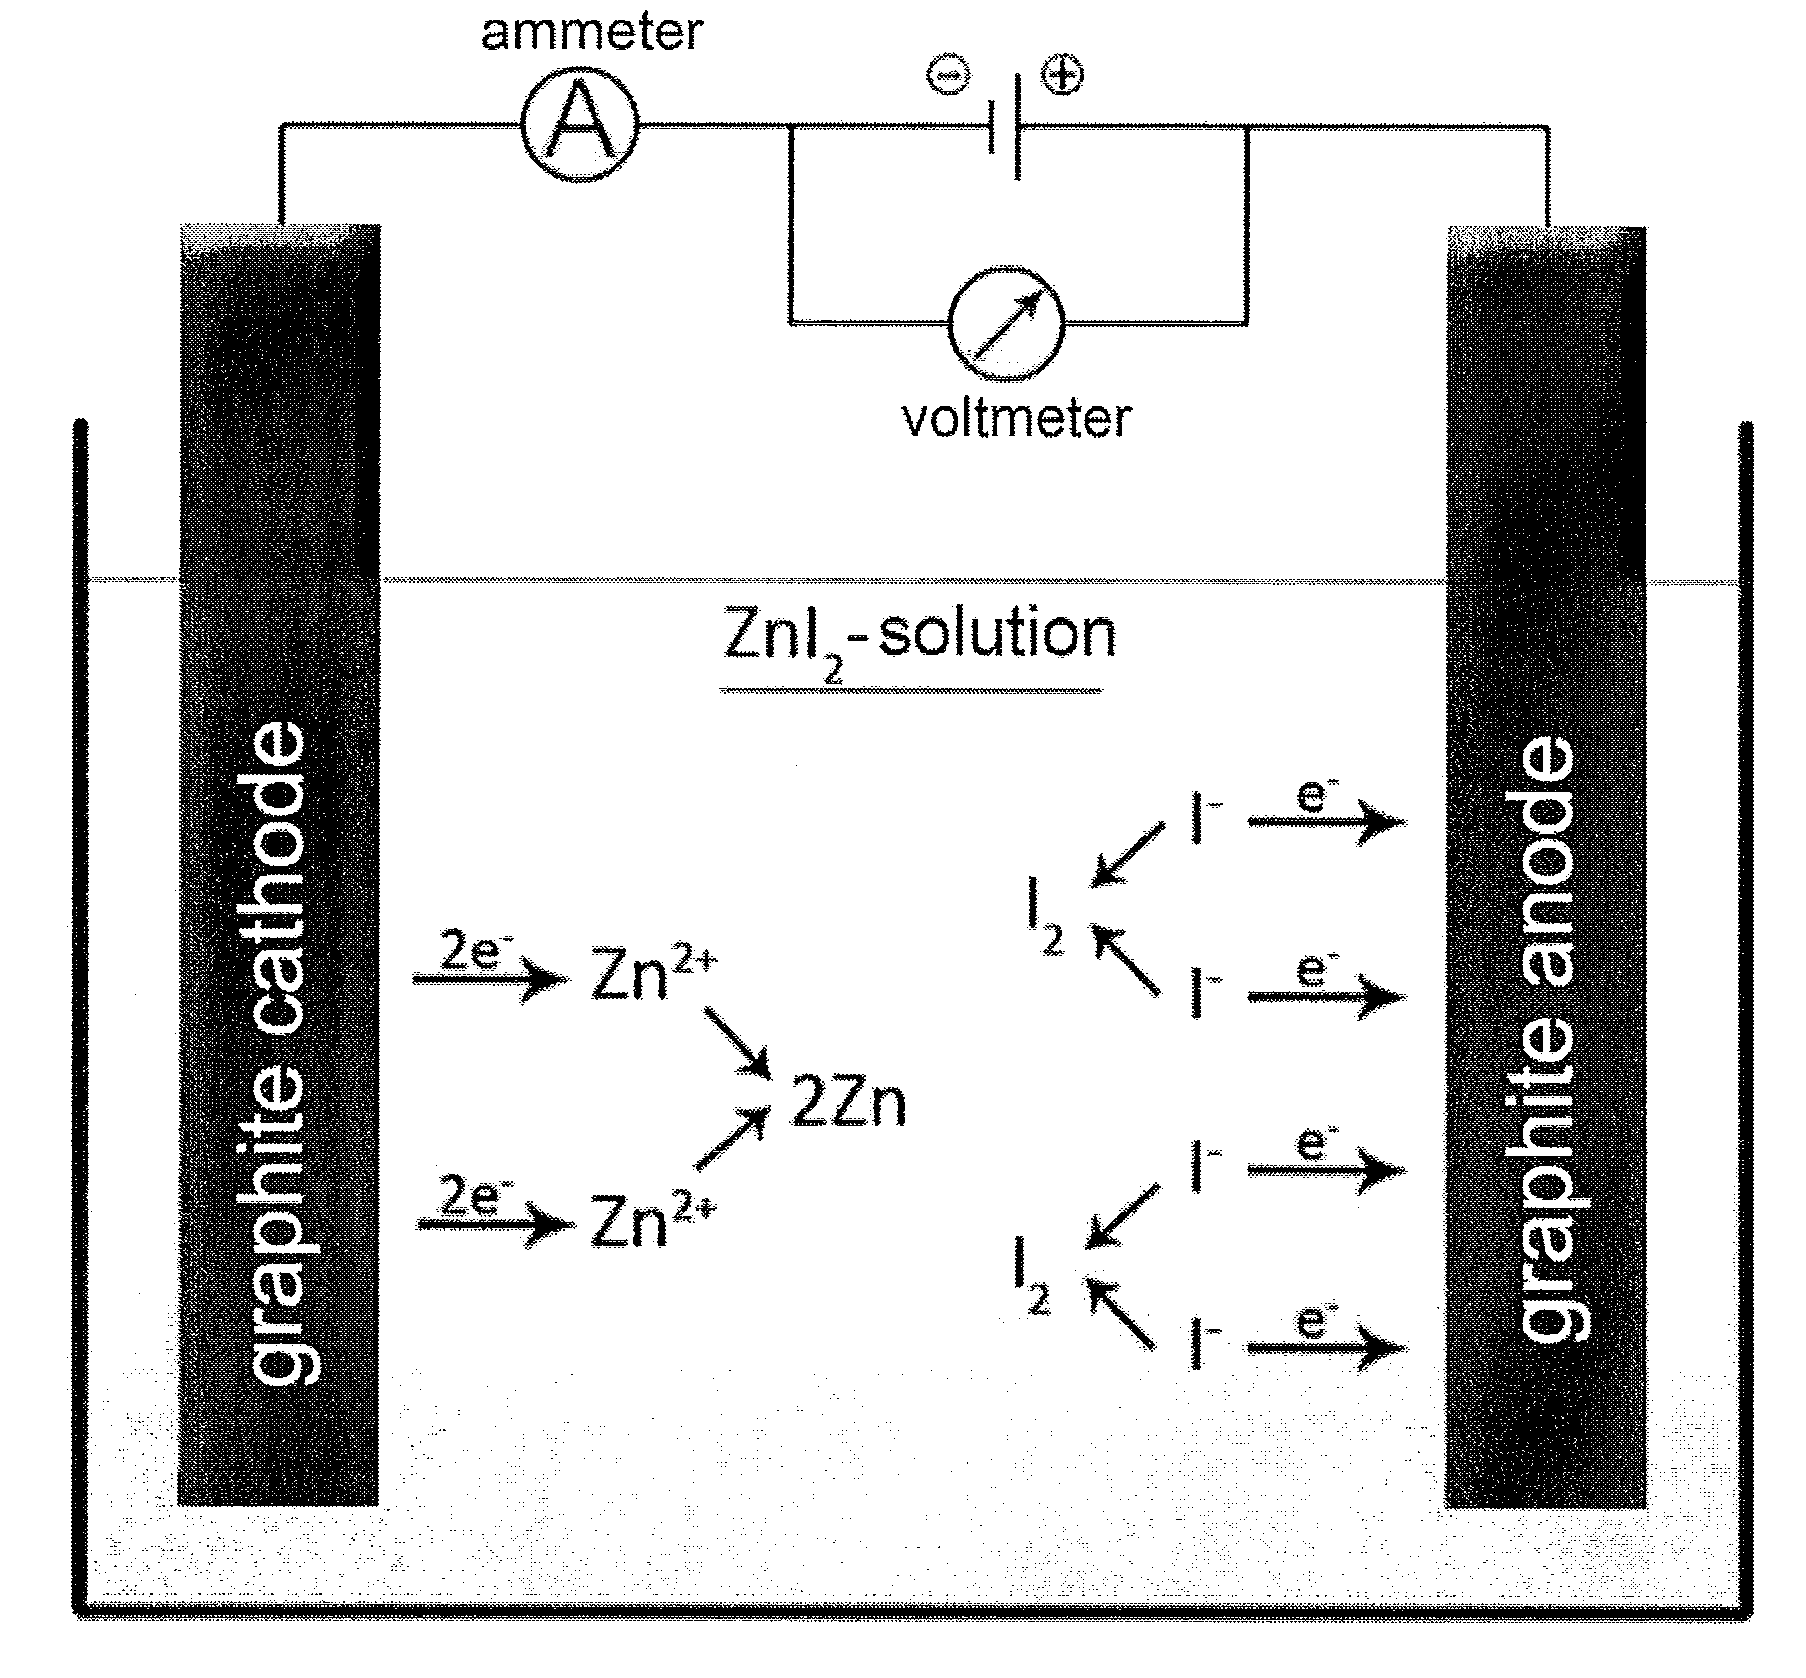 Method and technical embodiment for the cleaning of surfaces by means of a high-pressure cleaning device using electrolyzed water by using oxidative free radicals